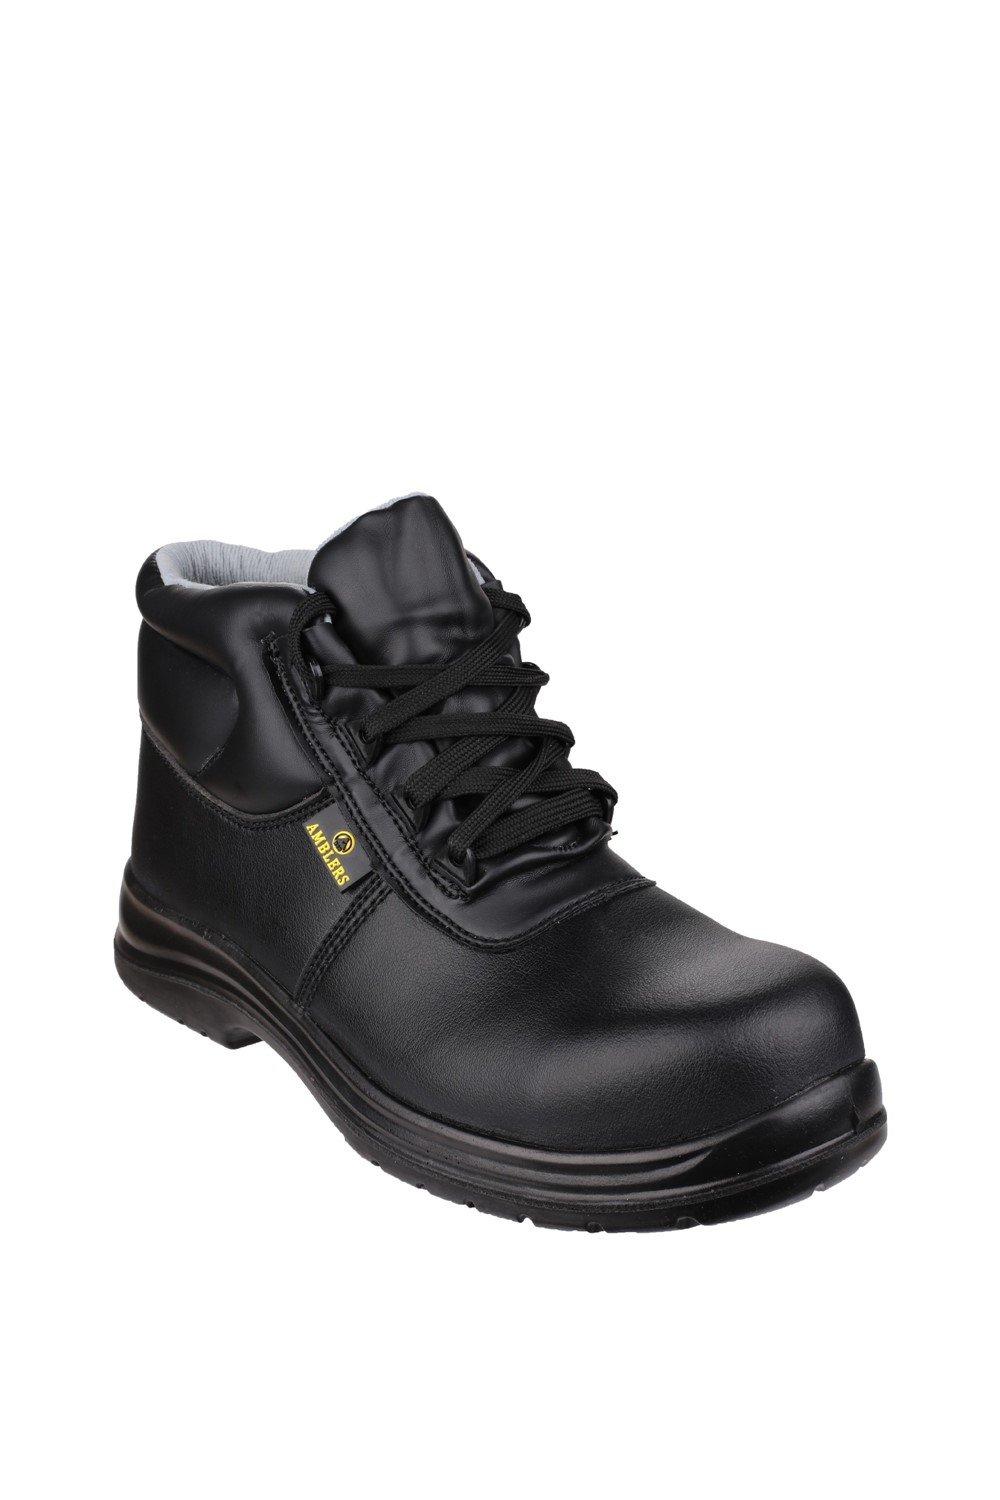 'FS663' Safety Shoes